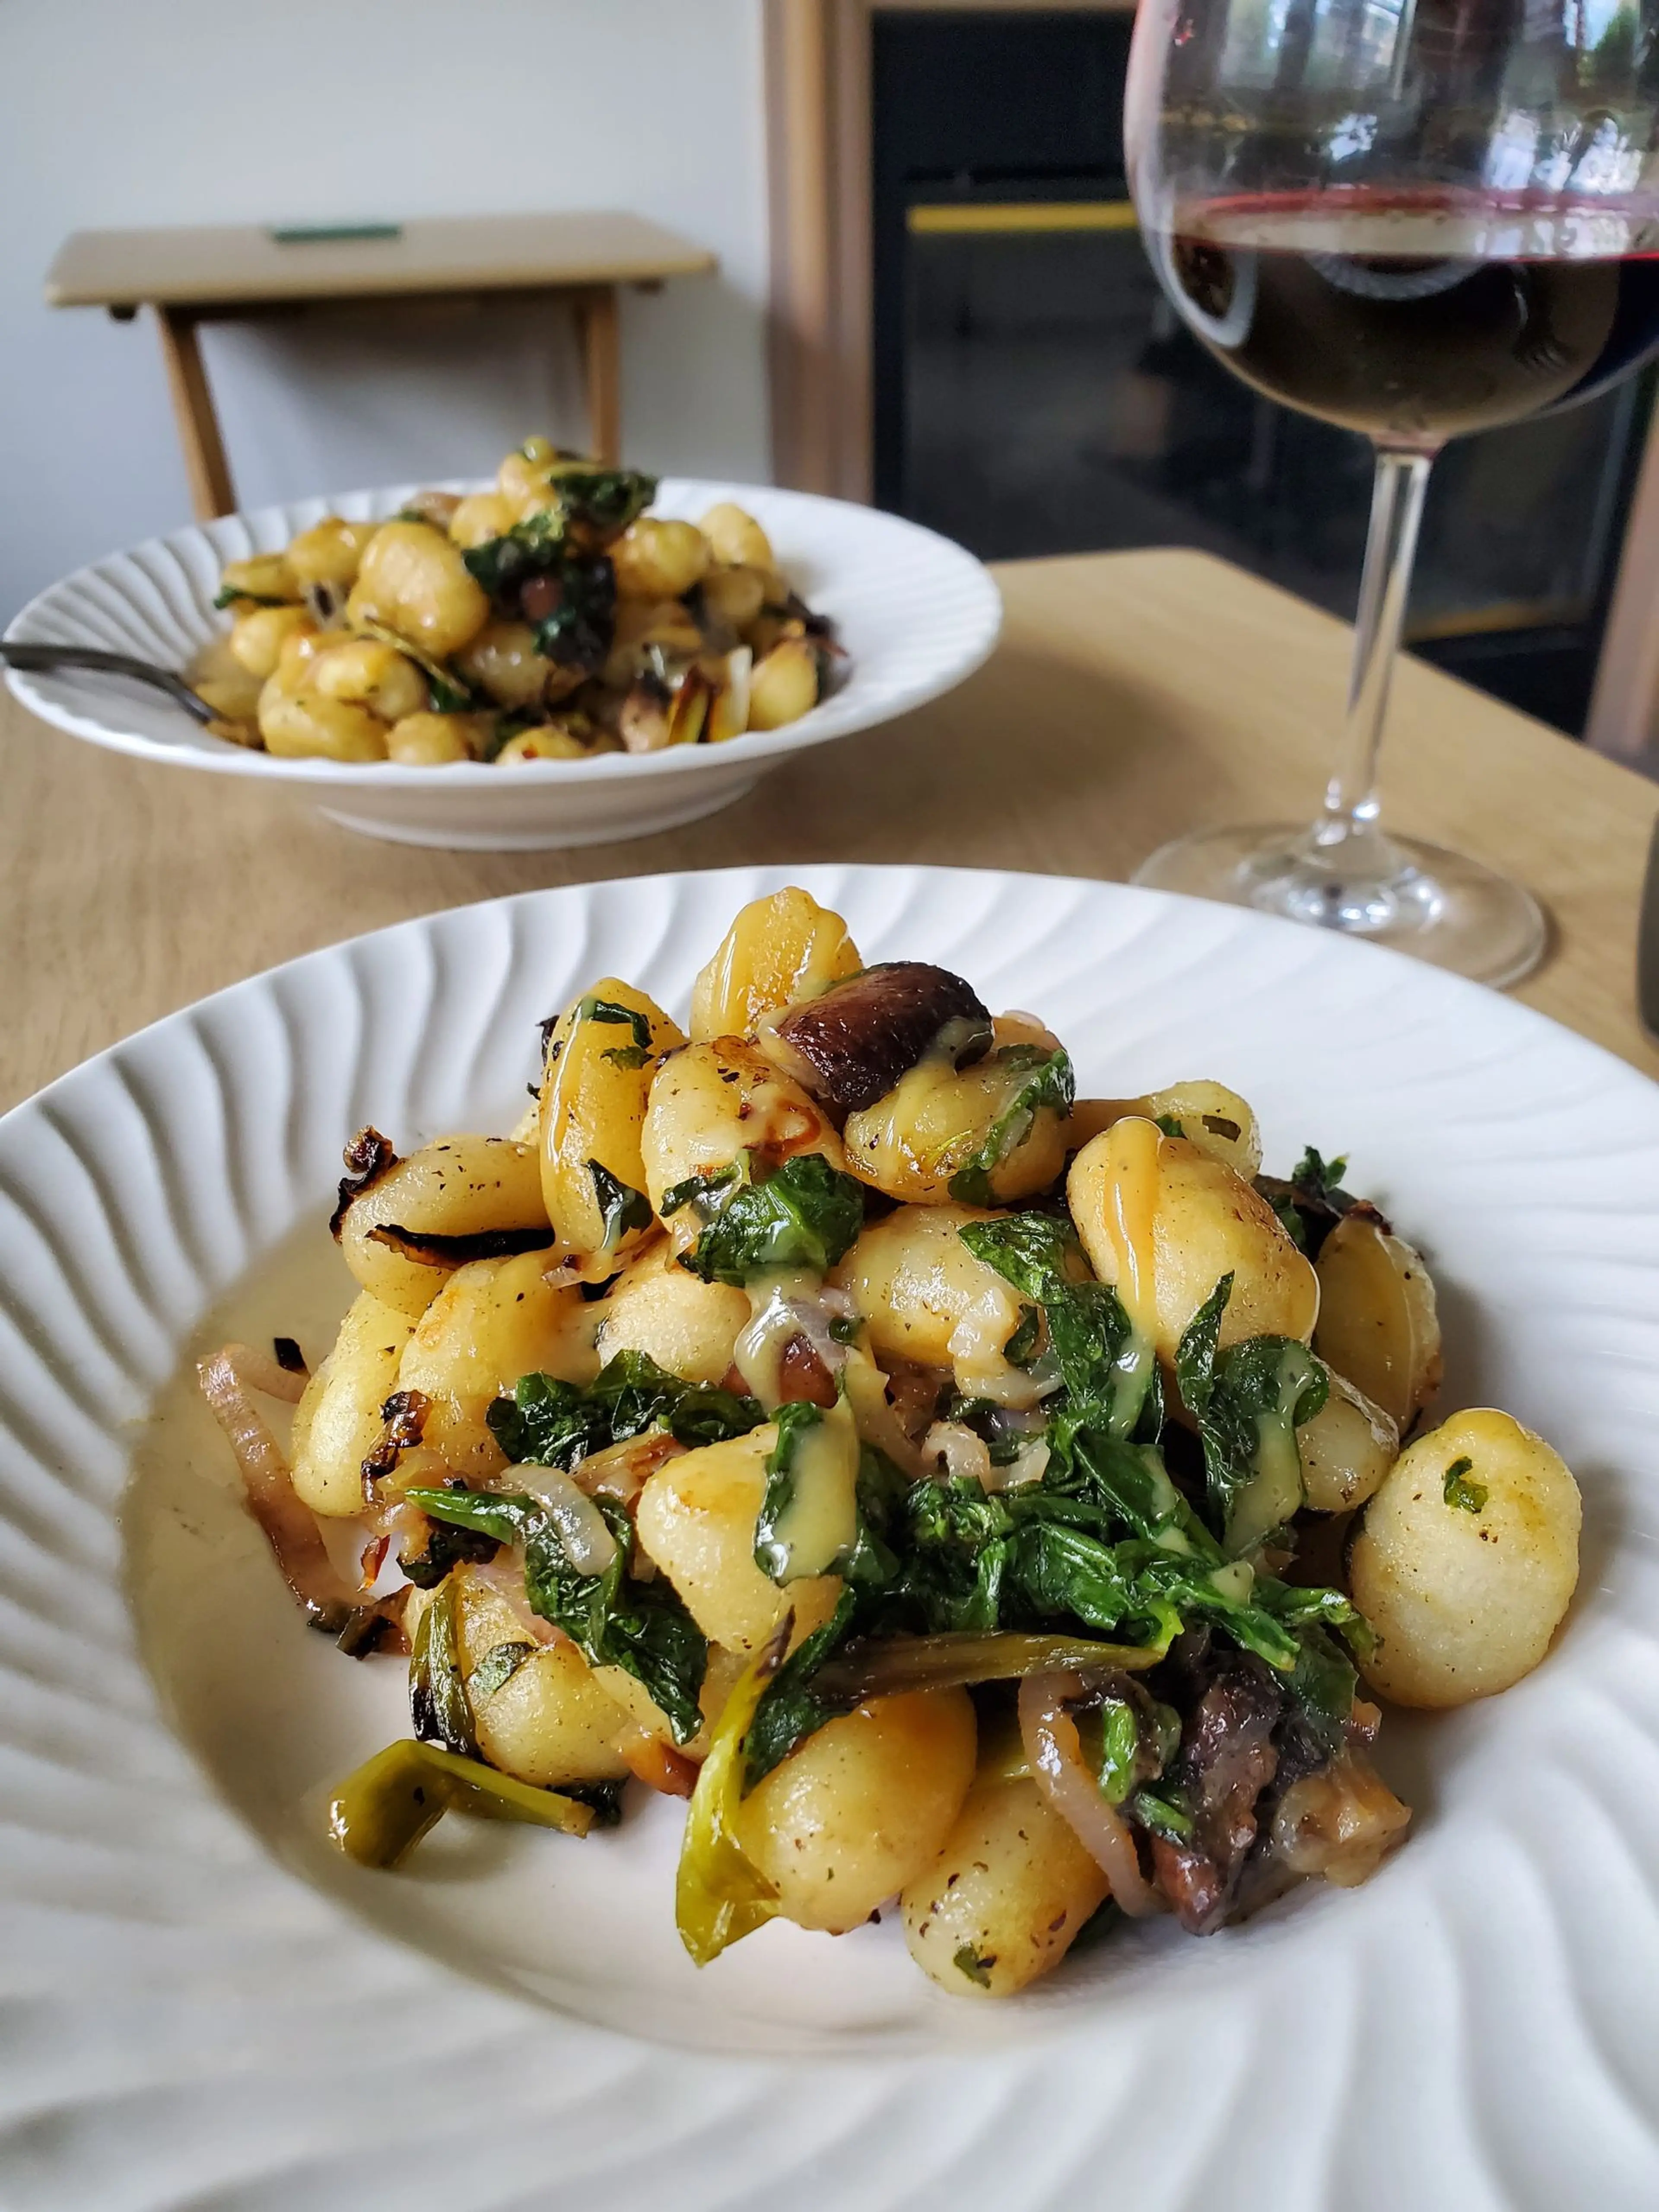 Sheet-Pan Gnocchi With Mushrooms and Spinach